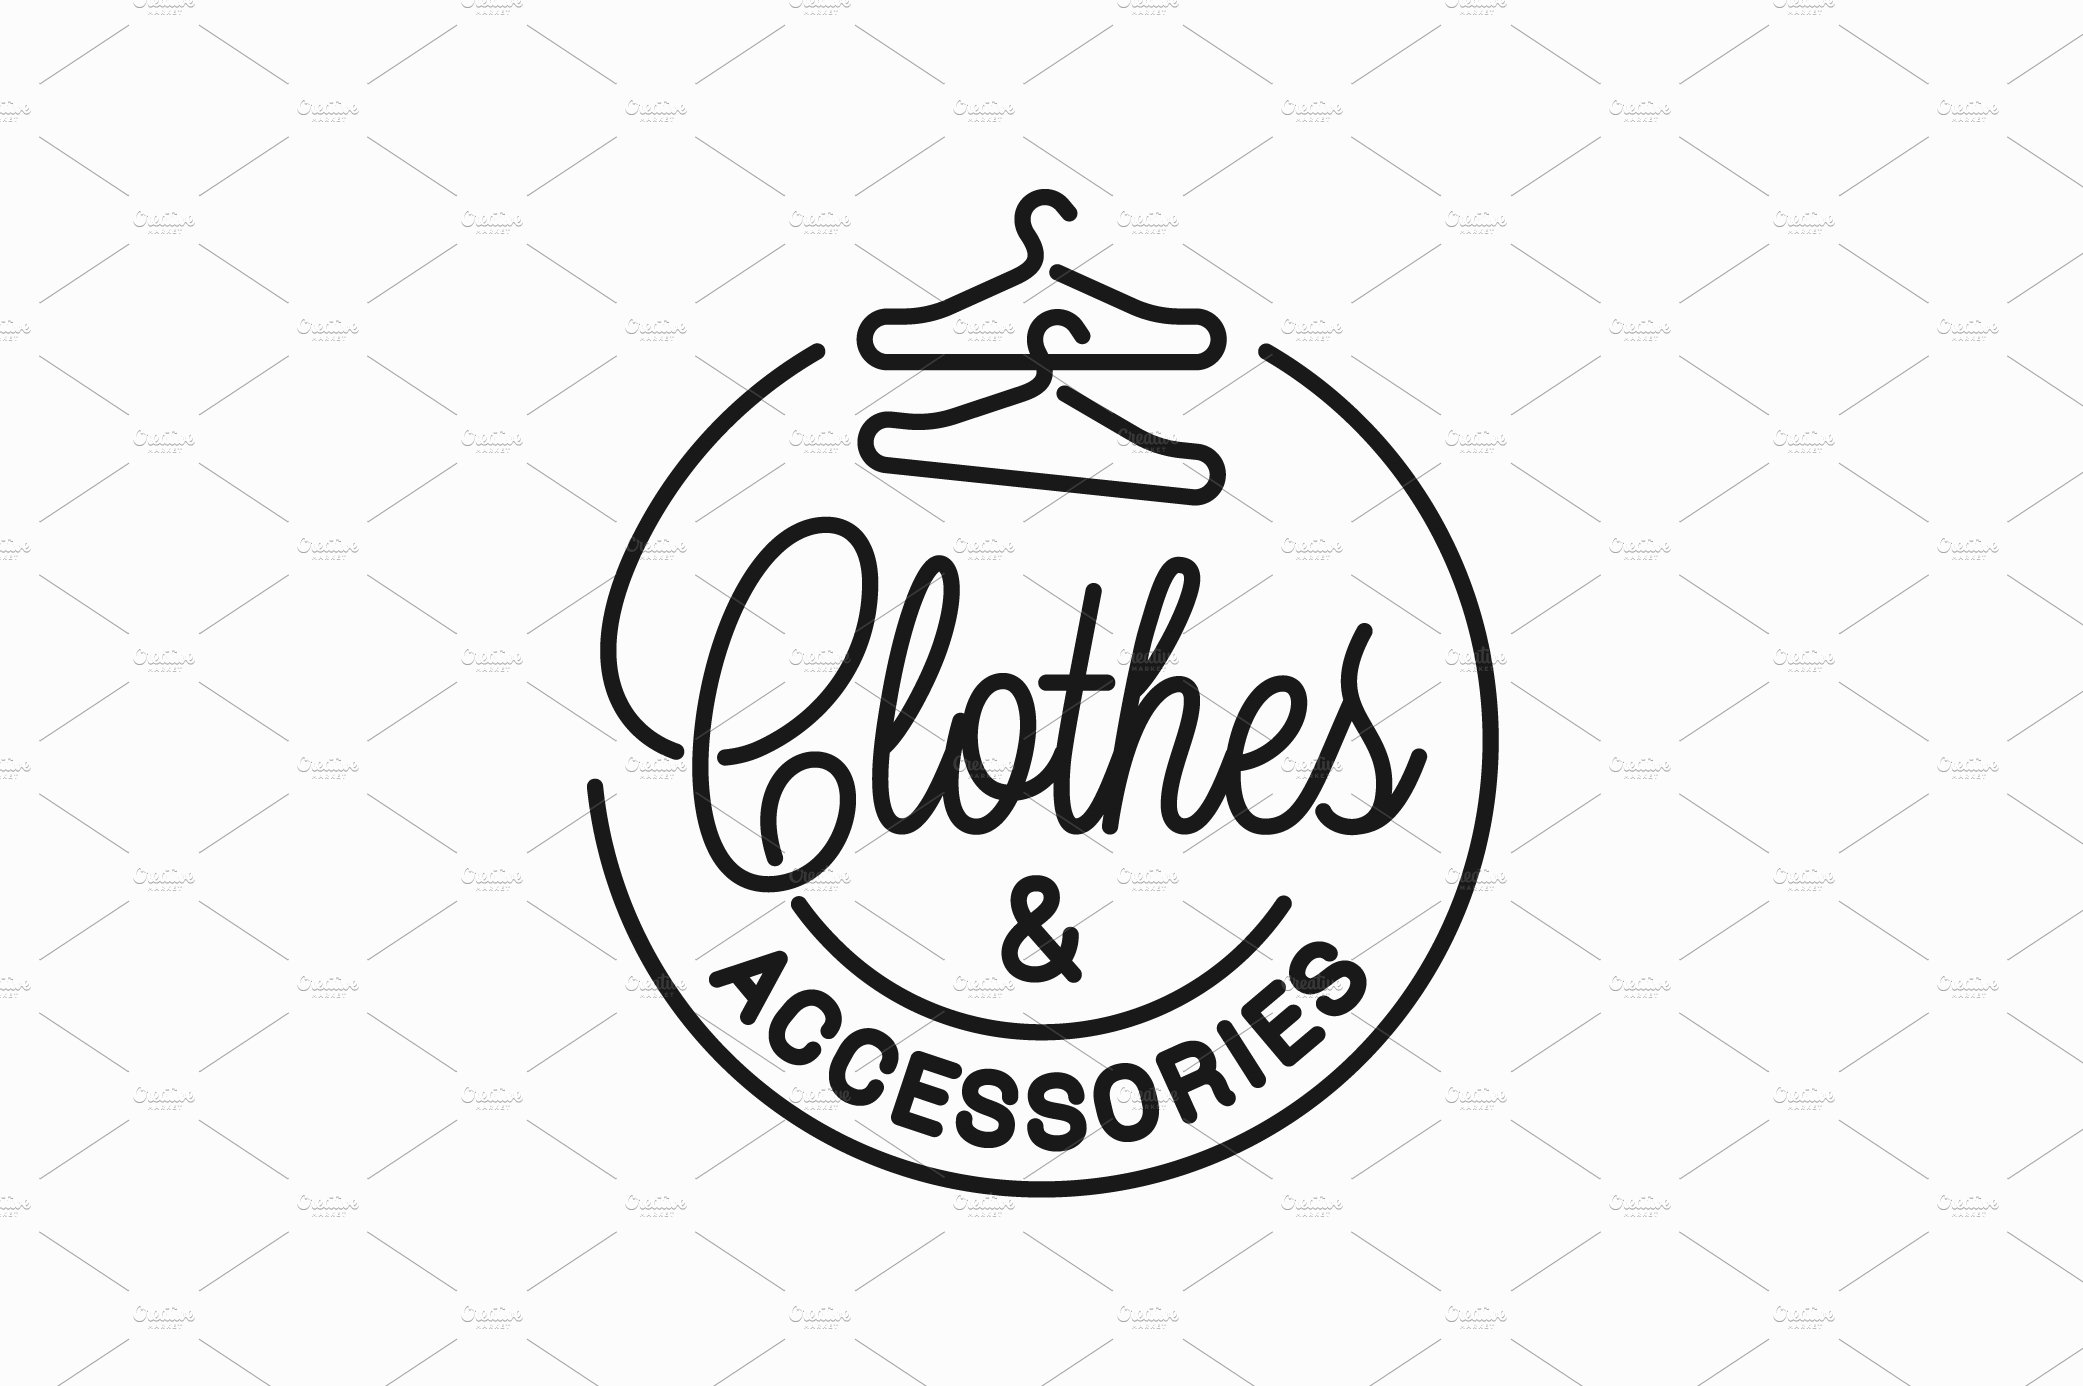 Clothes and accessories logo. cover image.